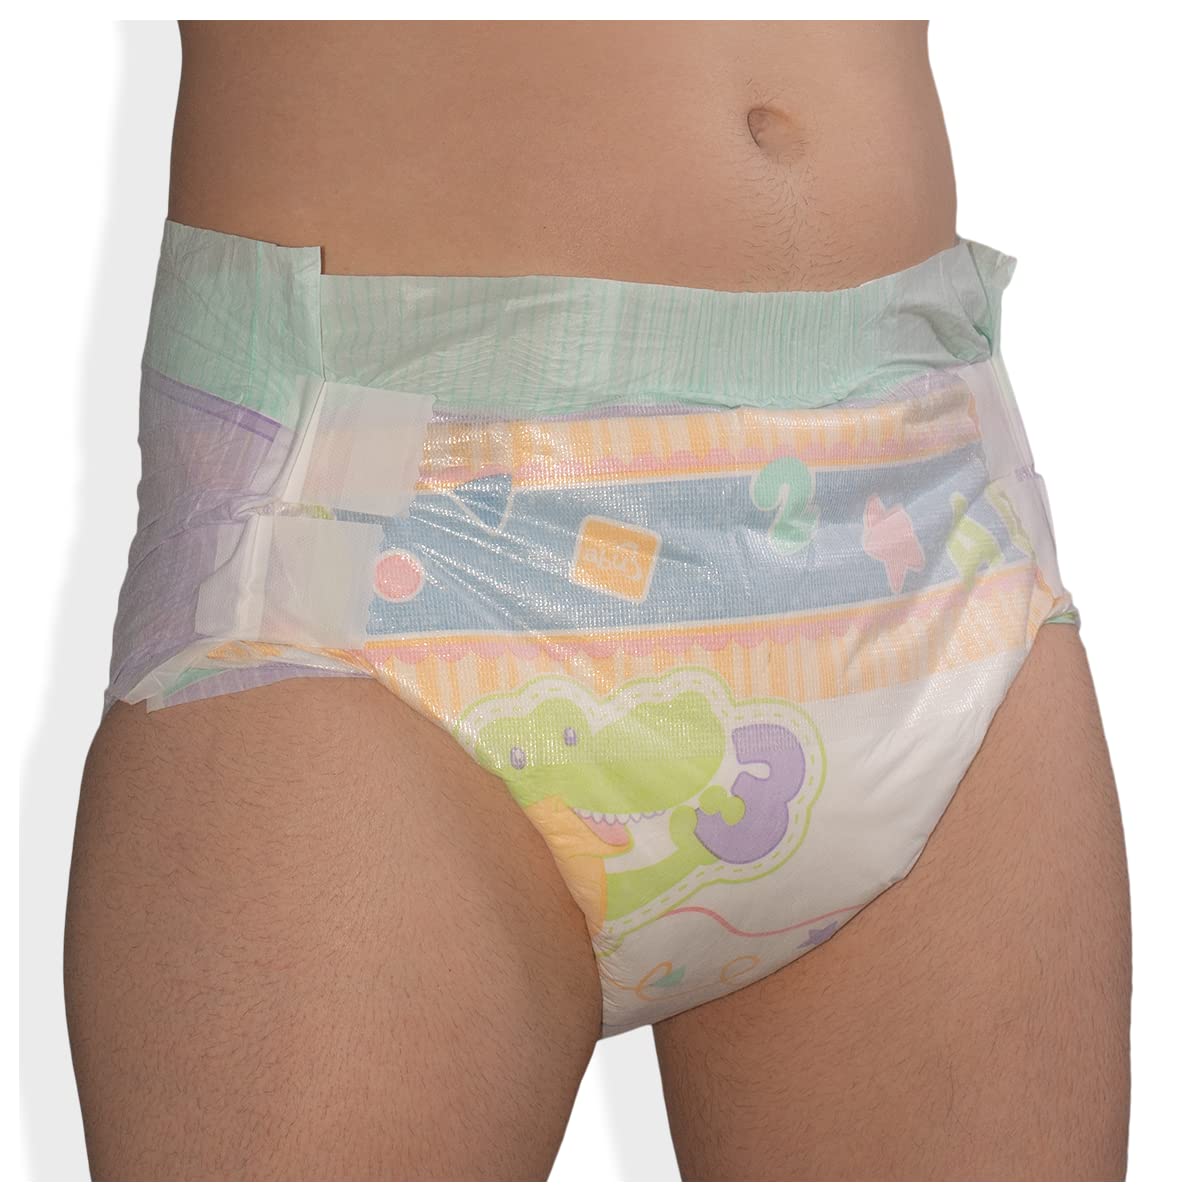 ABUniverse AlphaGatorz Diapers (Pack of 10) (Extra Large)